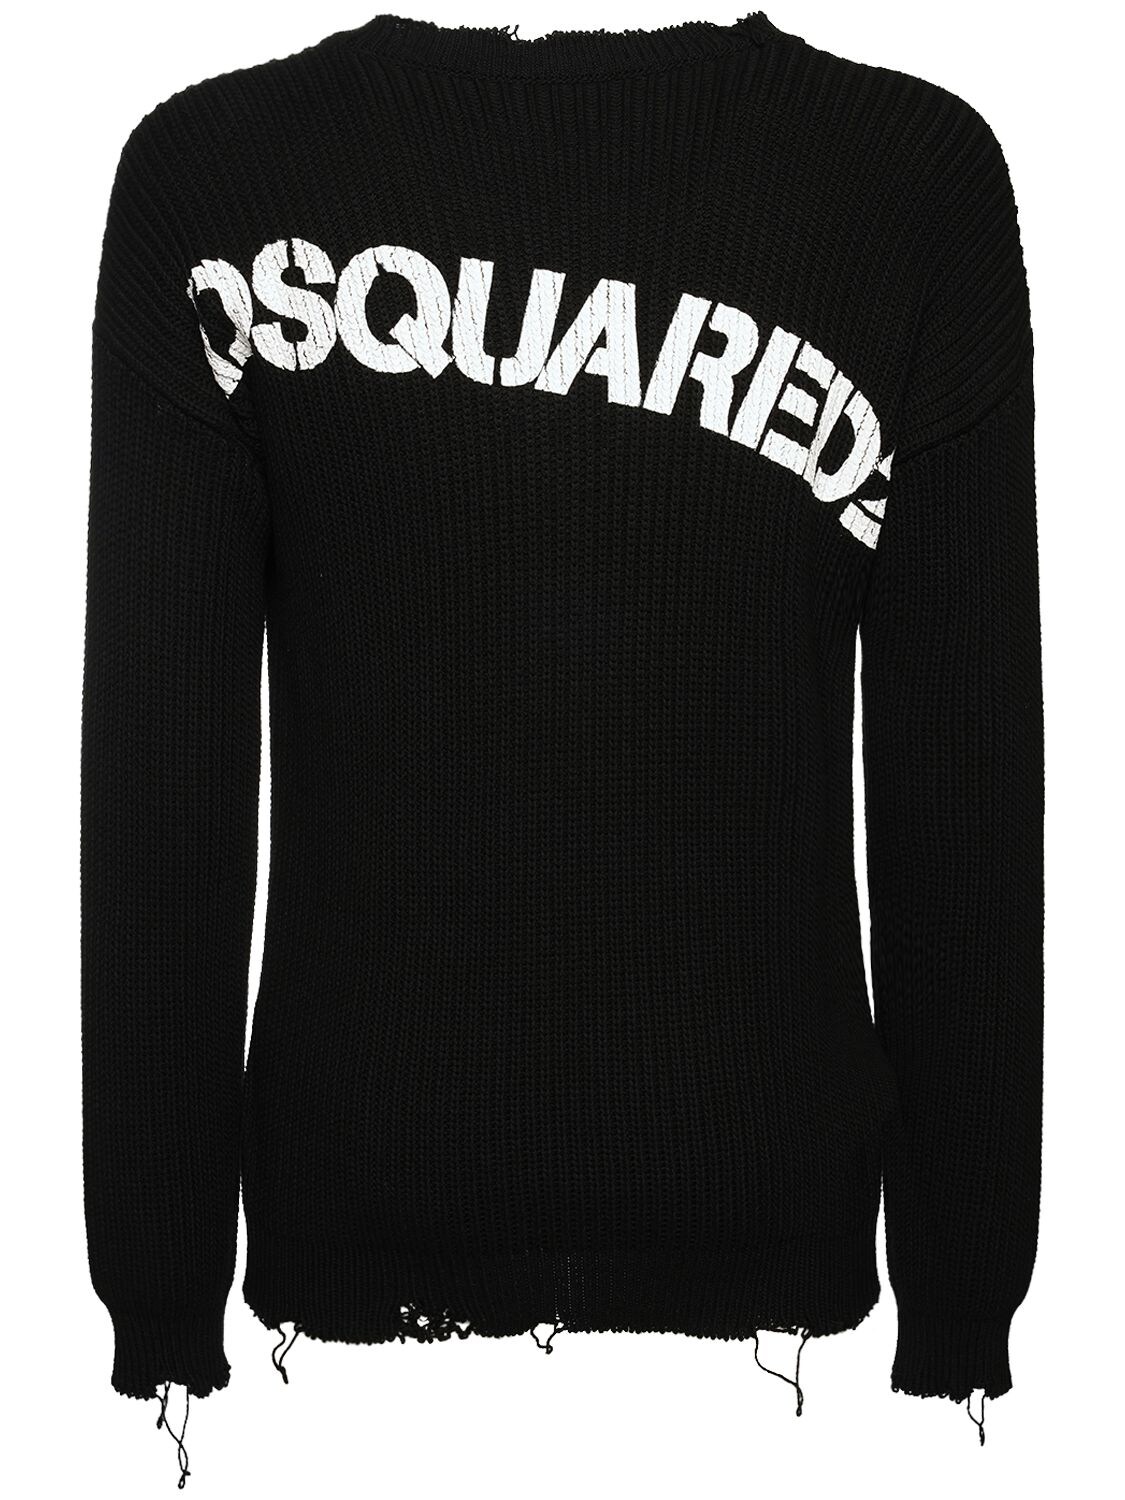 DSQUARED2 DESTROYED LOGO PRINT KNIT COTTON SWEATER,73I04Y048-OTAW0